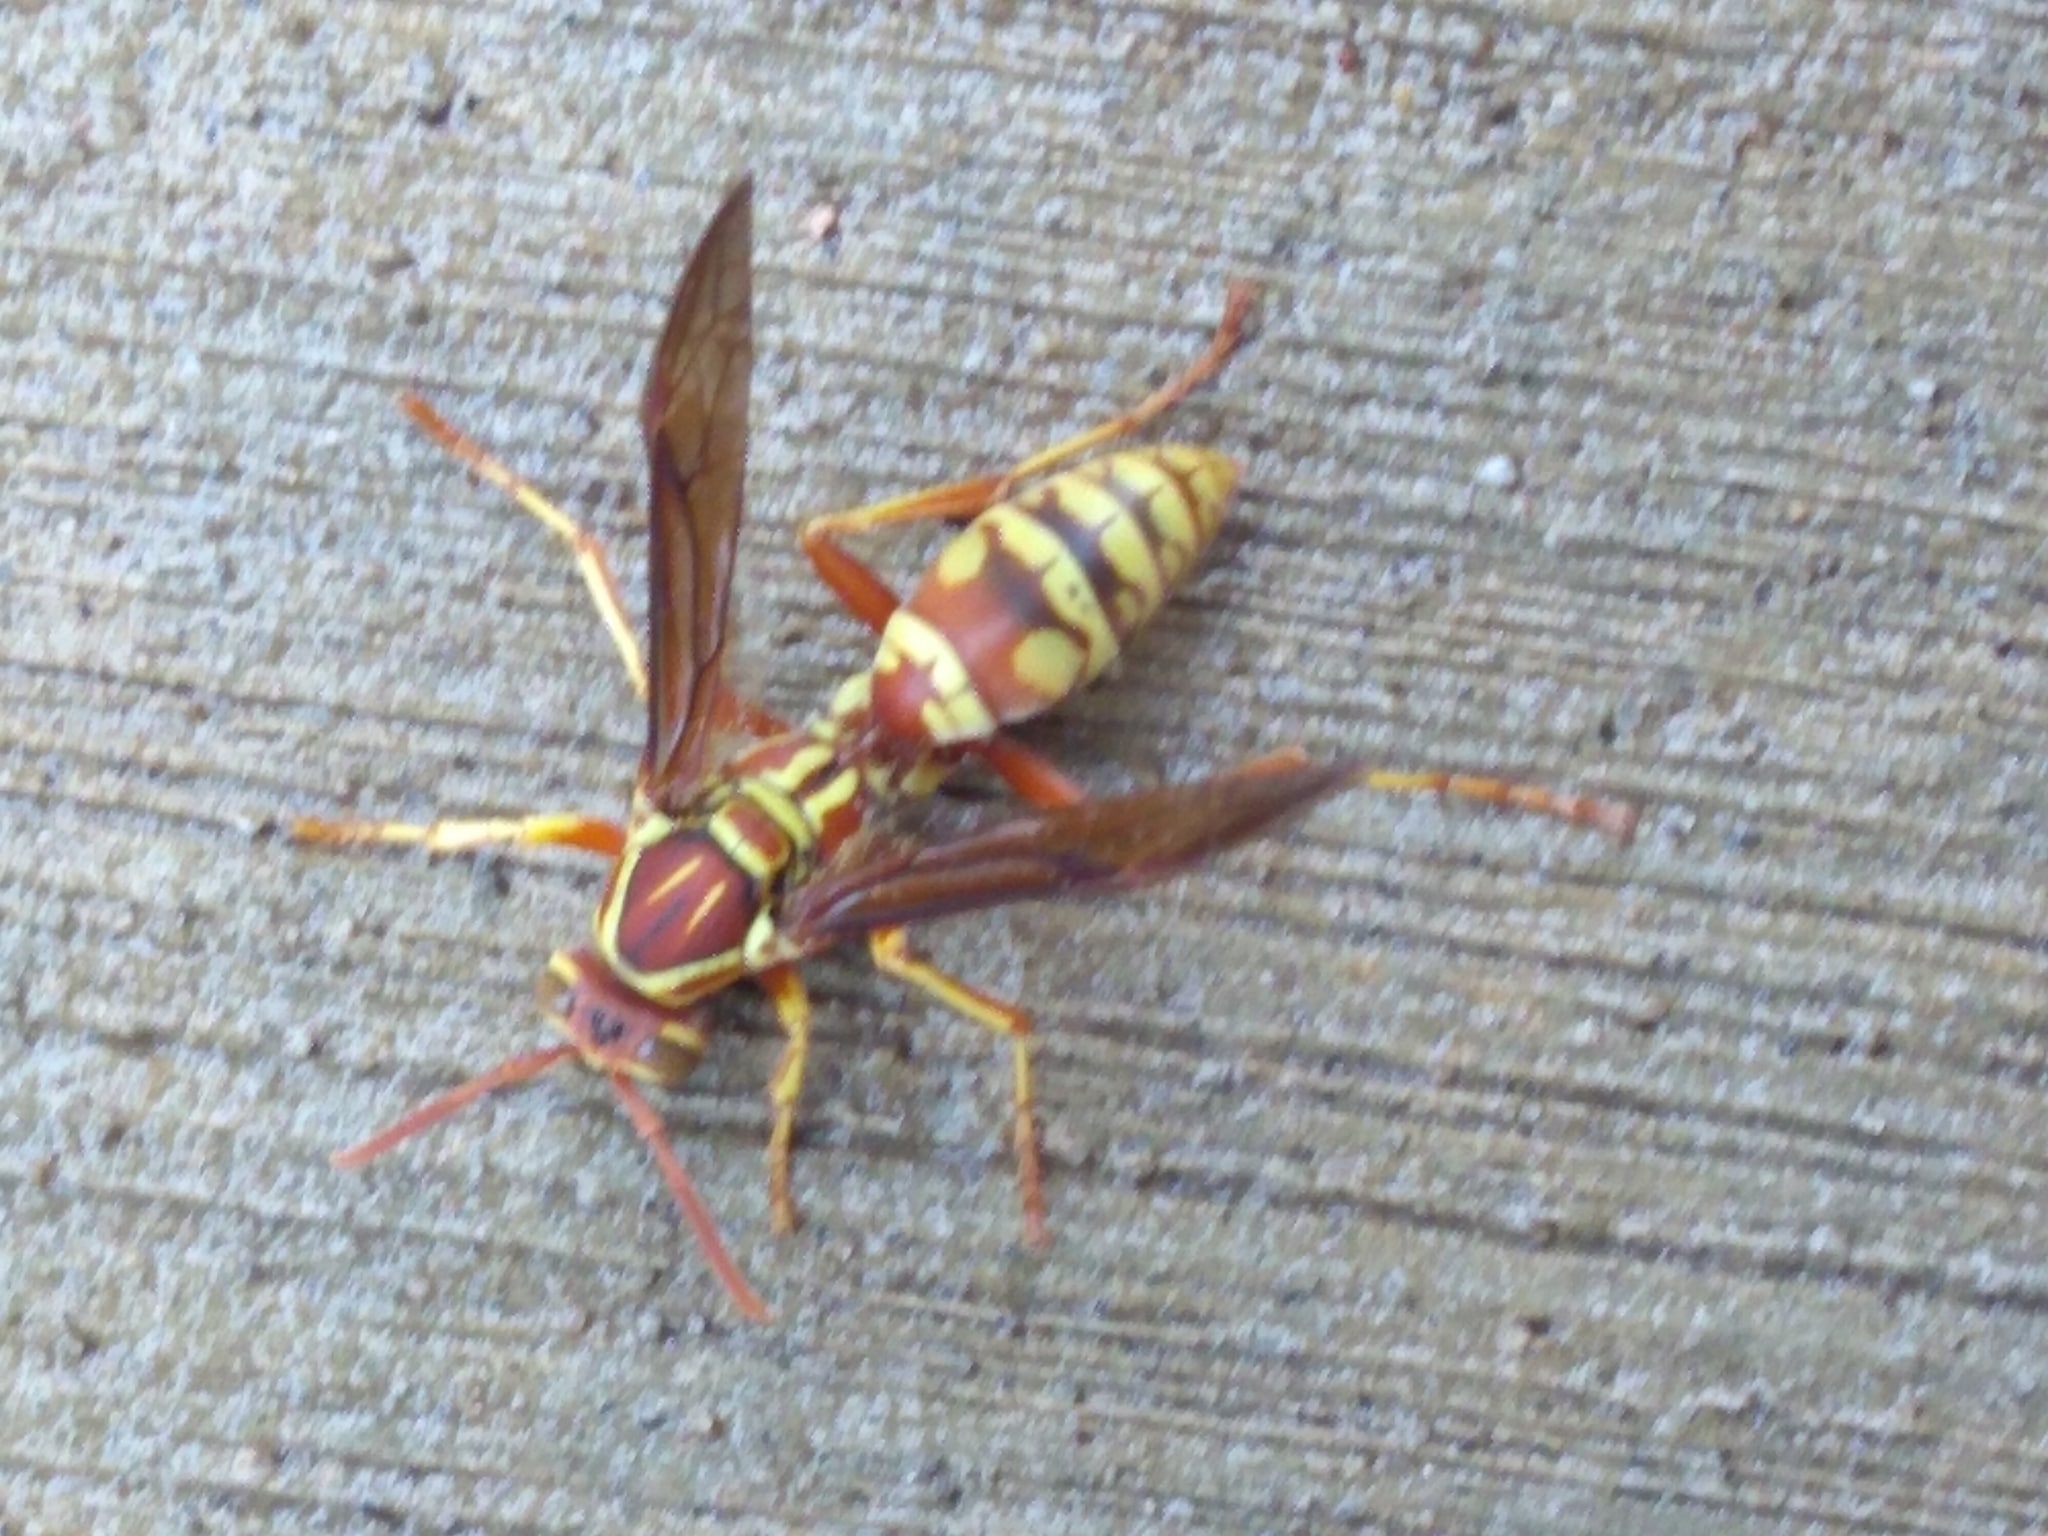 Southwestern Texas Paper Wasp